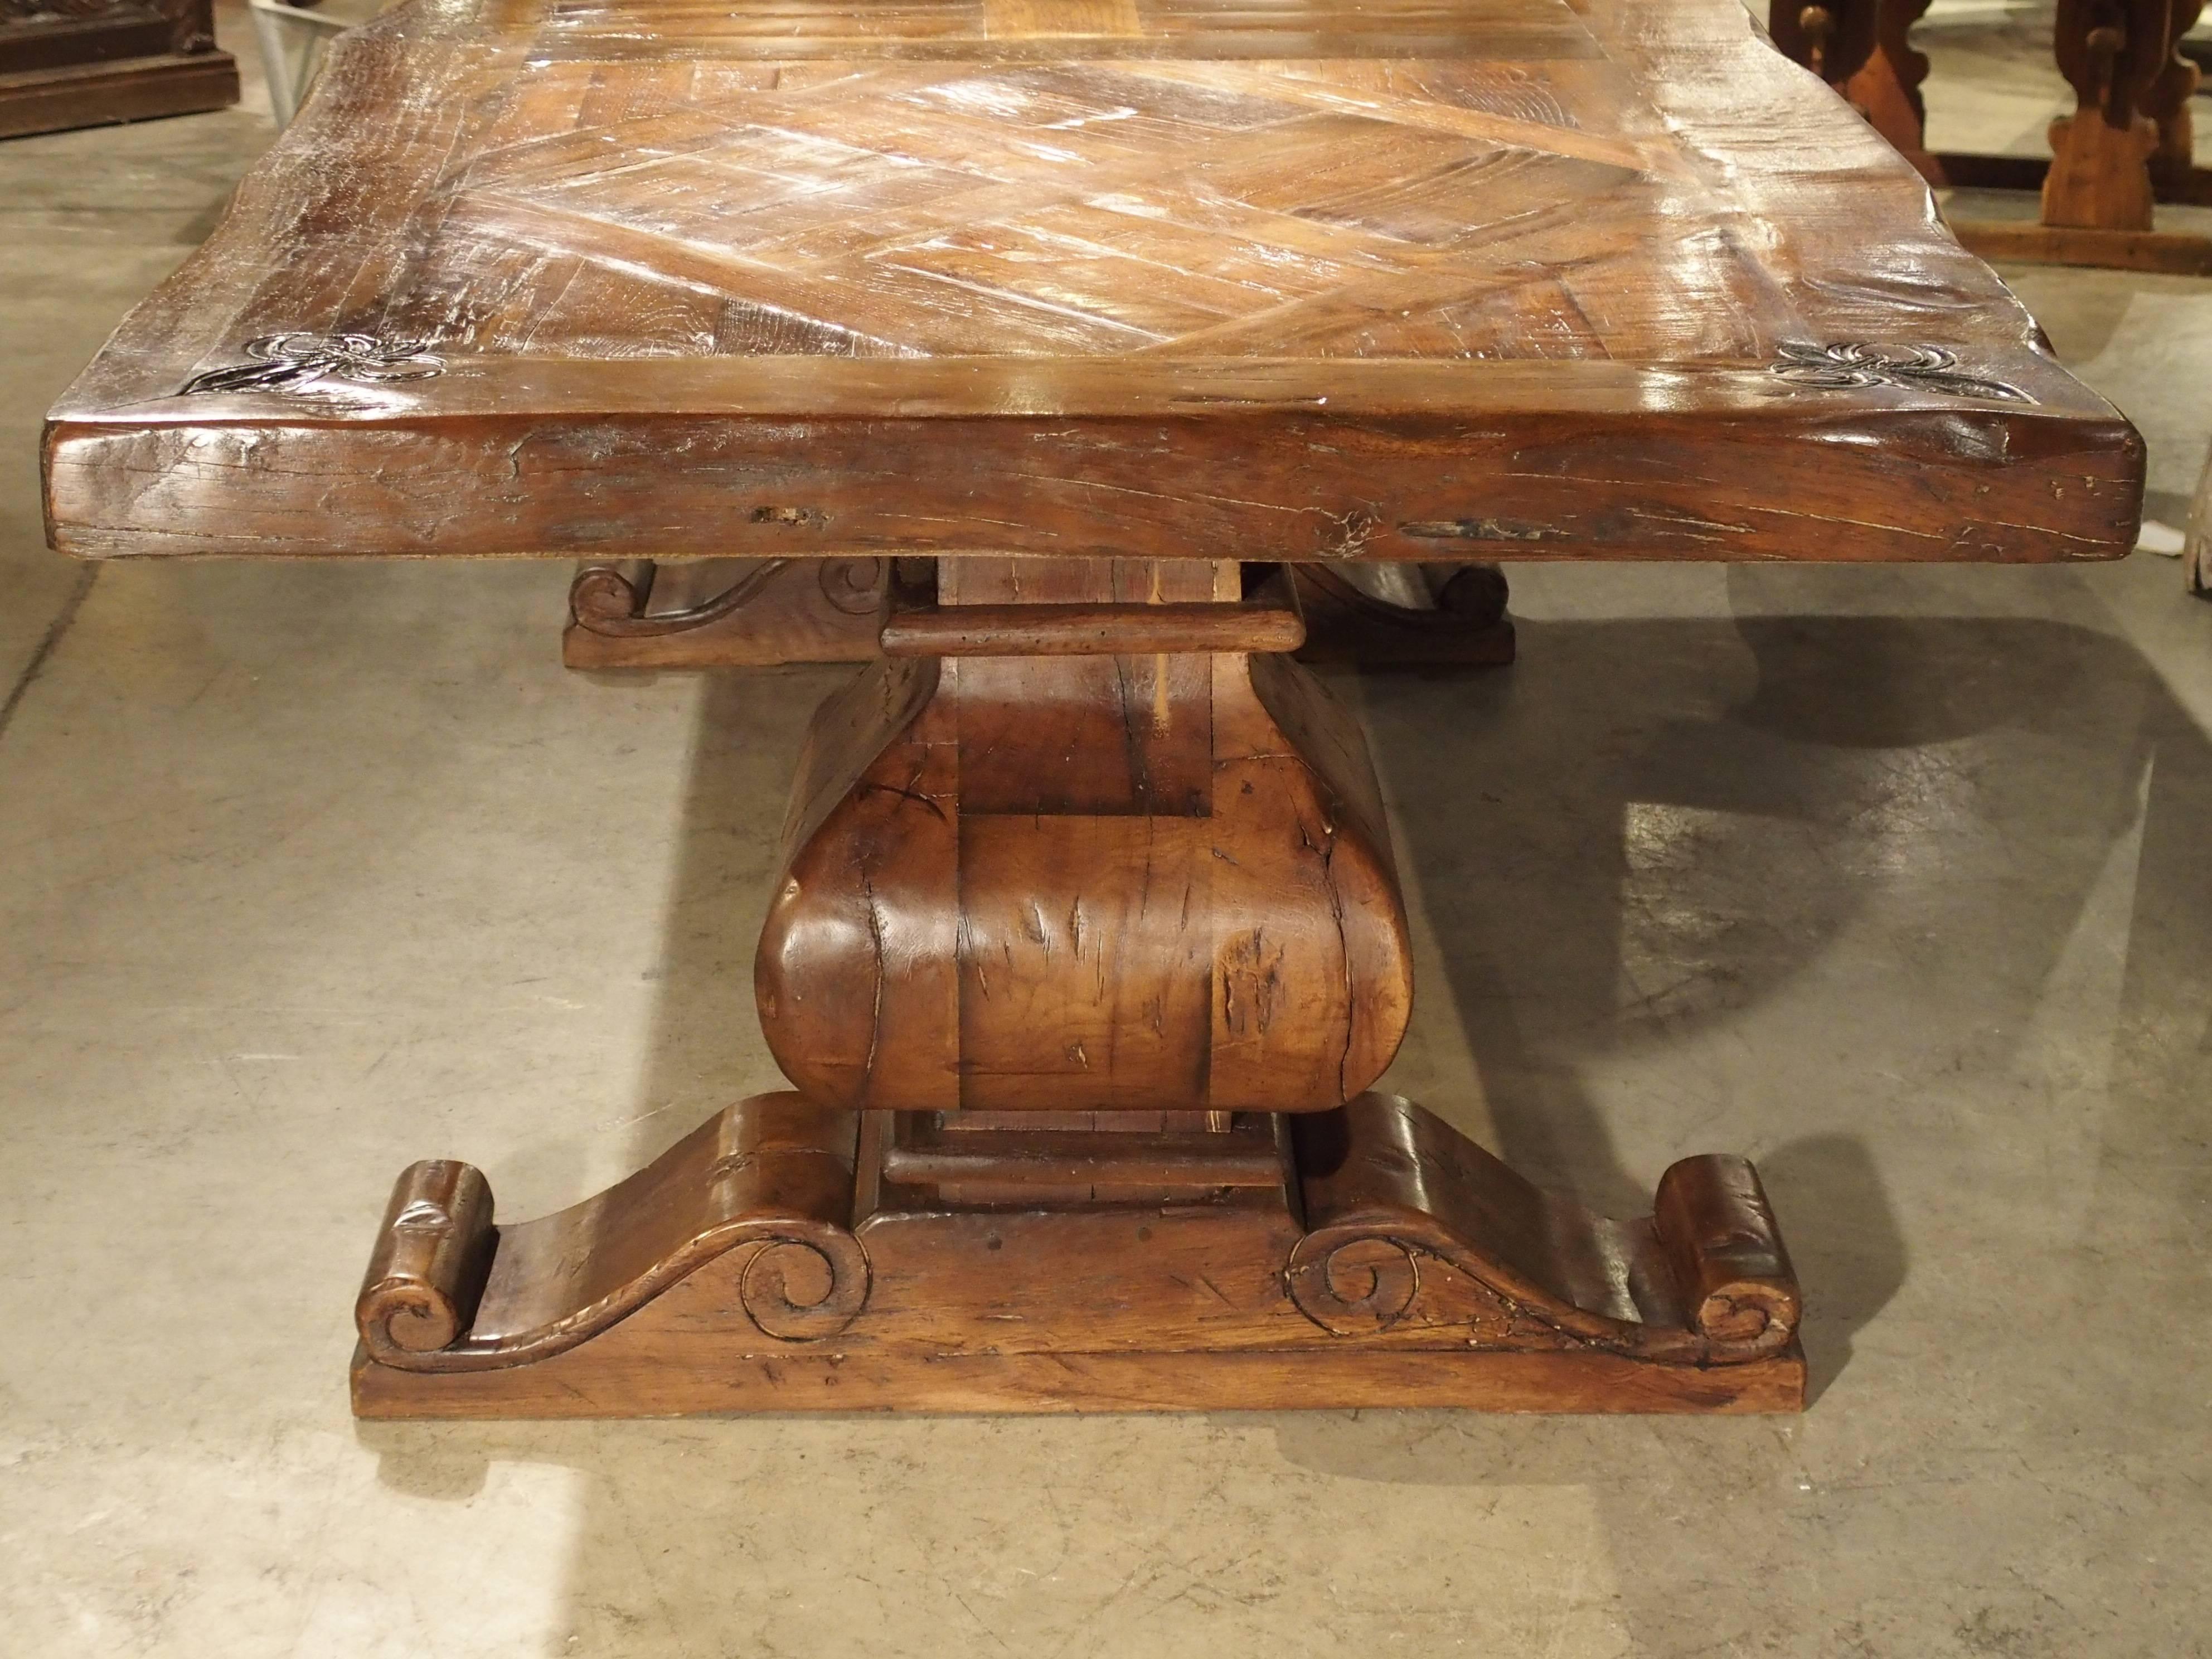 This magnificent dining room table was made in France, using oak. The top is made of two large parquet sections, separated by straight beam sections. A thick border of uneven boards encompasses the entire tabletop. At each corner of the border are